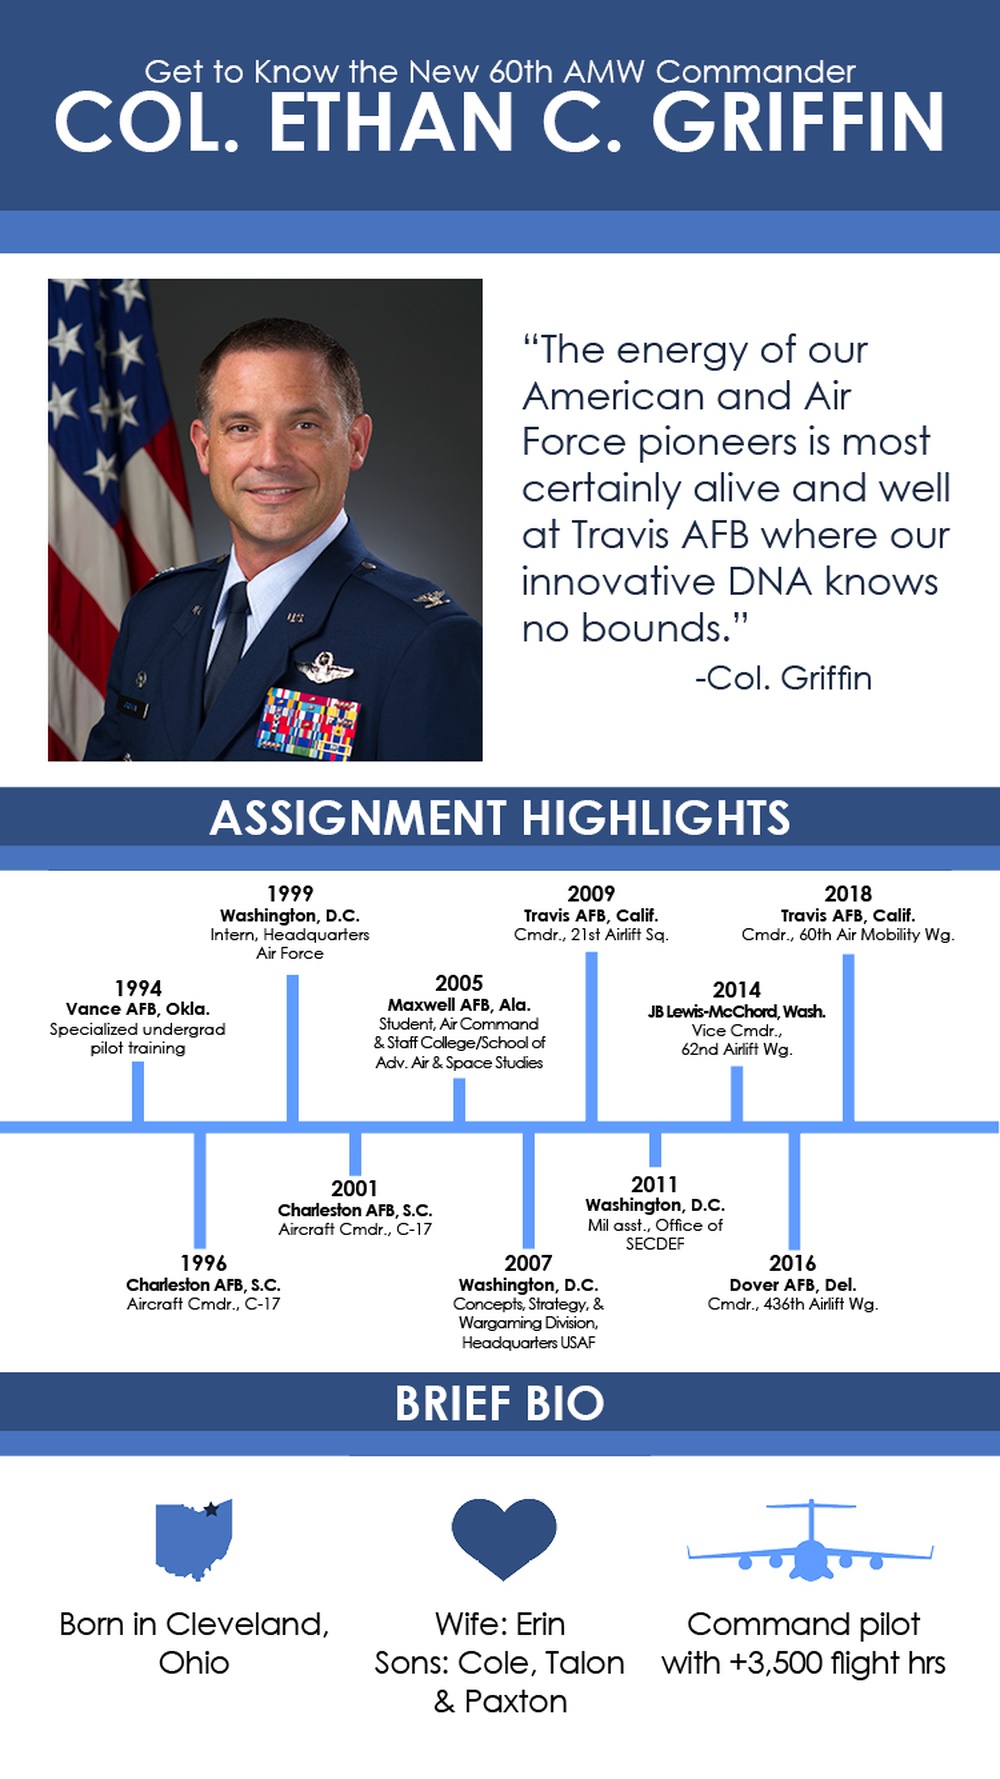 Get to Know the New 60th AMW Commander Col. Ethan C. Griffin